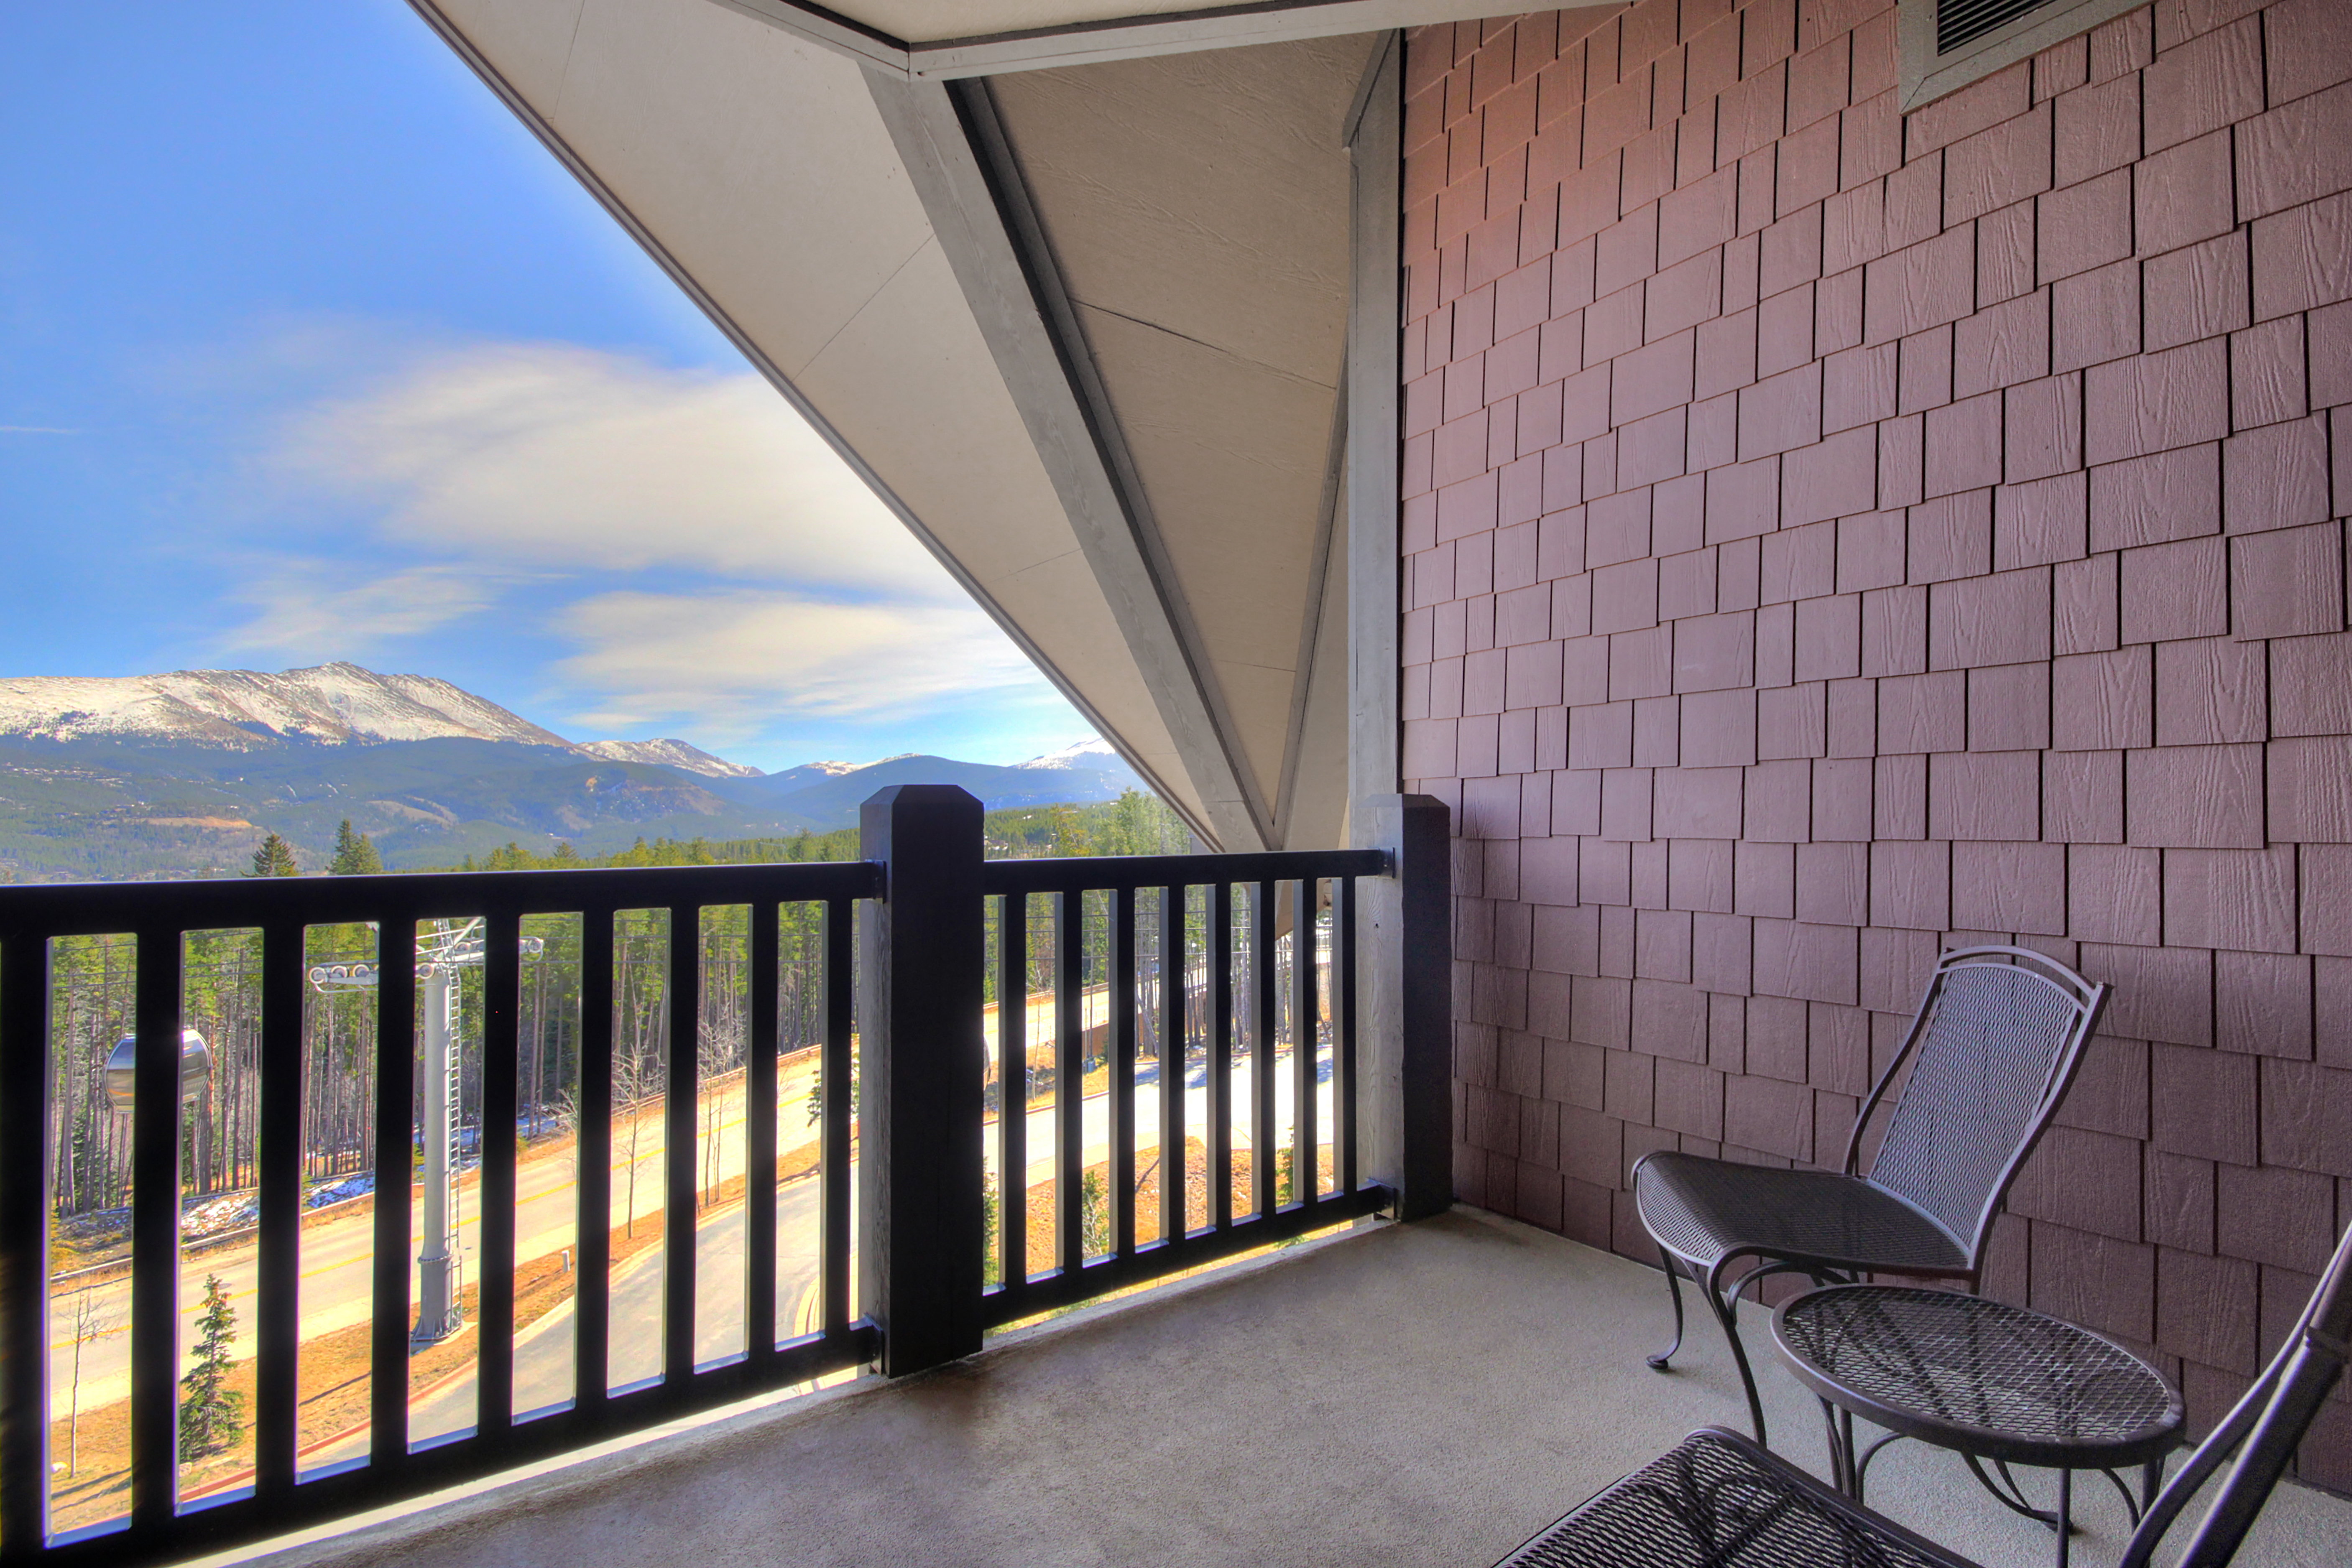 Enjoy coffee on the private deck while taking in the view.